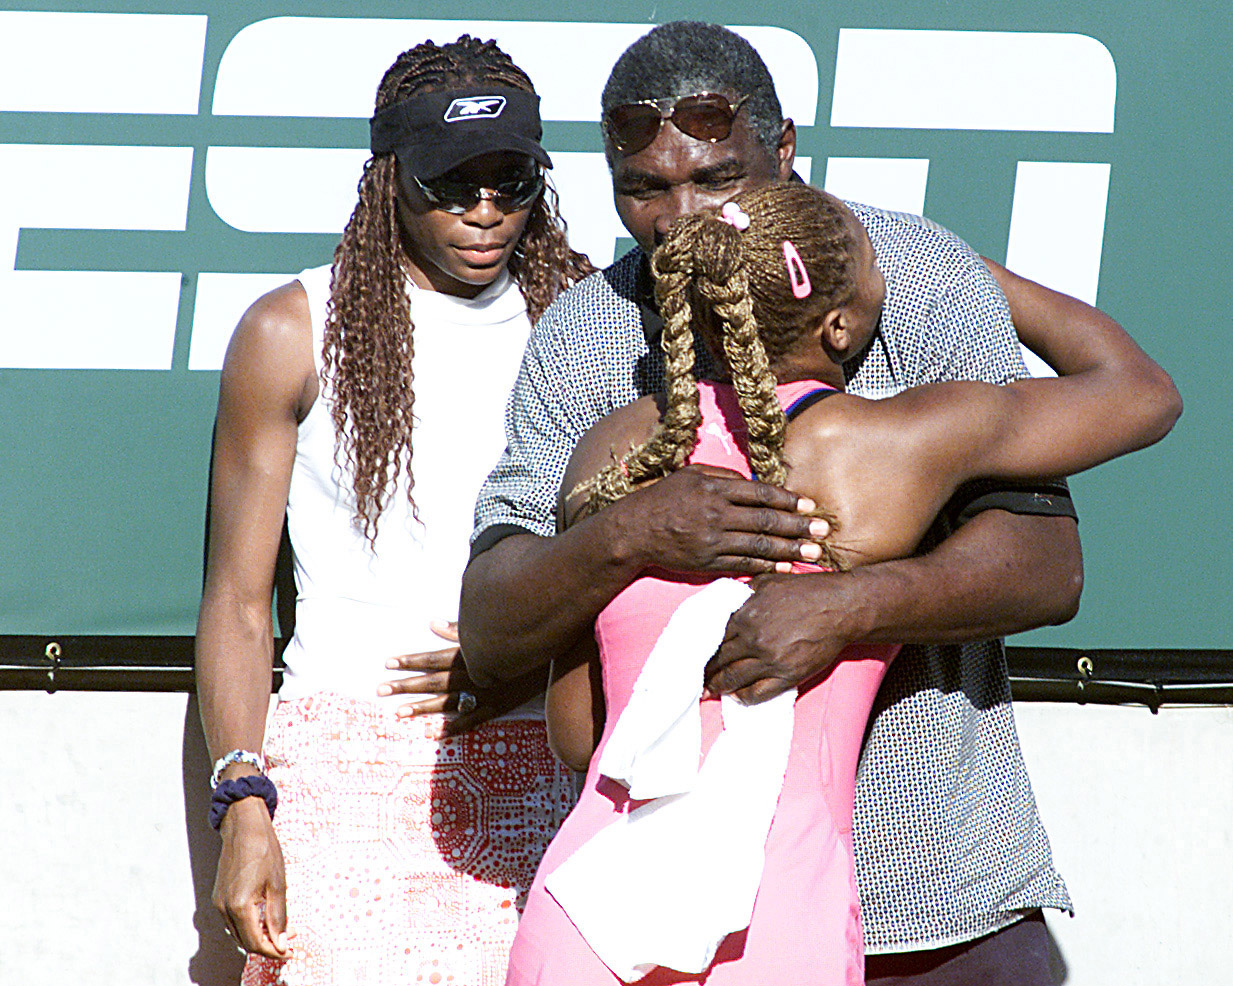 17 Mar 2001:  Serena Williams of the USA hugs her father Richard as her sister Venus waits in the back after her victory over Kim Clijsters of Belgium during the final of the Tennis Masters Series at Indian Wells, California. <DIGITAL IMAGE> Mandatory Cre